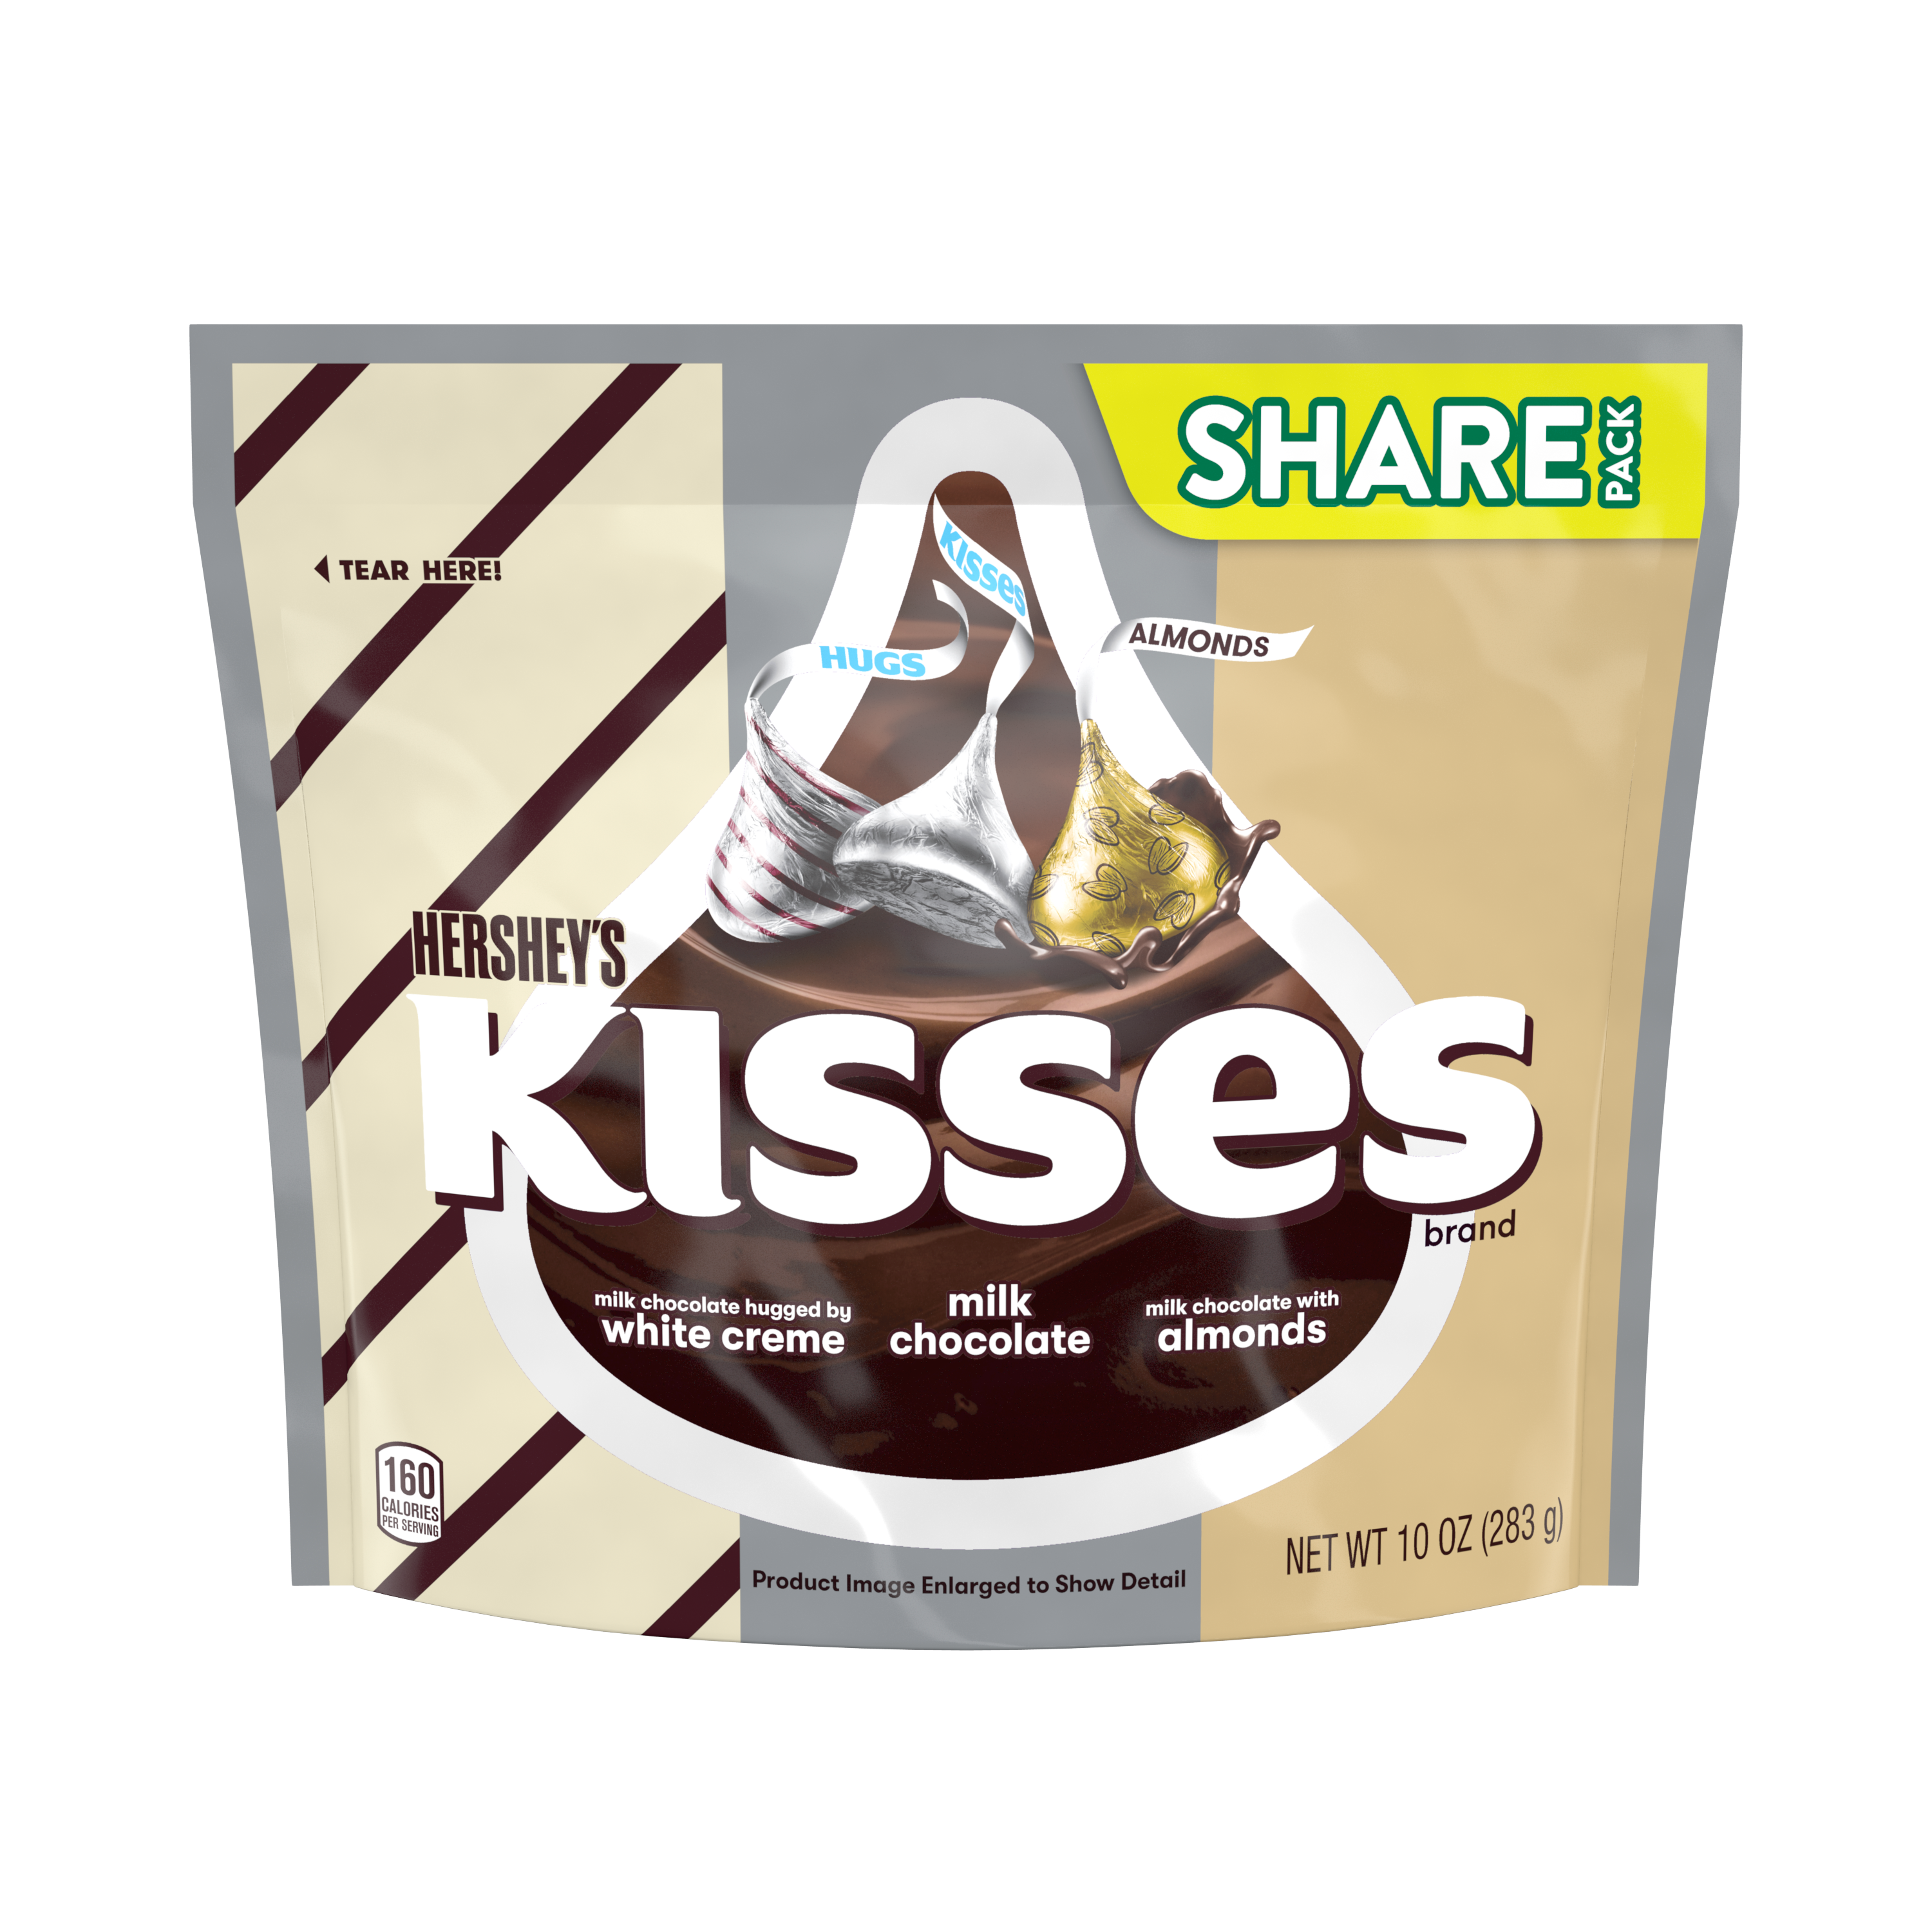 HERSHEY'S KISSES Assortment, 10 oz pack - Front of Package